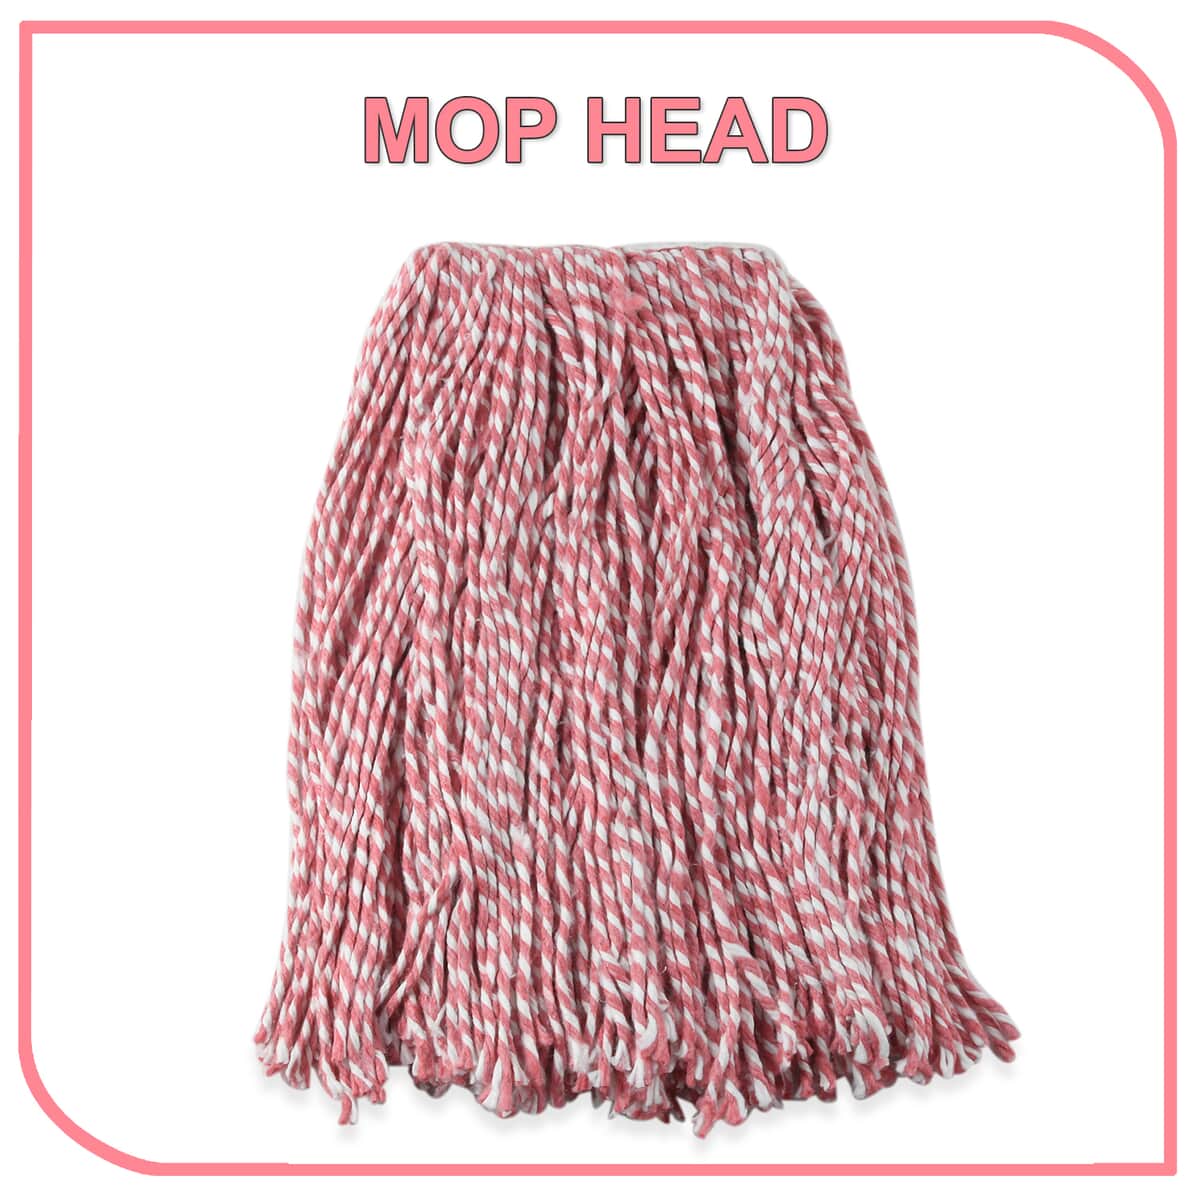 Quality Kitchen Red Wet Mop Head (100% Cotton) image number 4